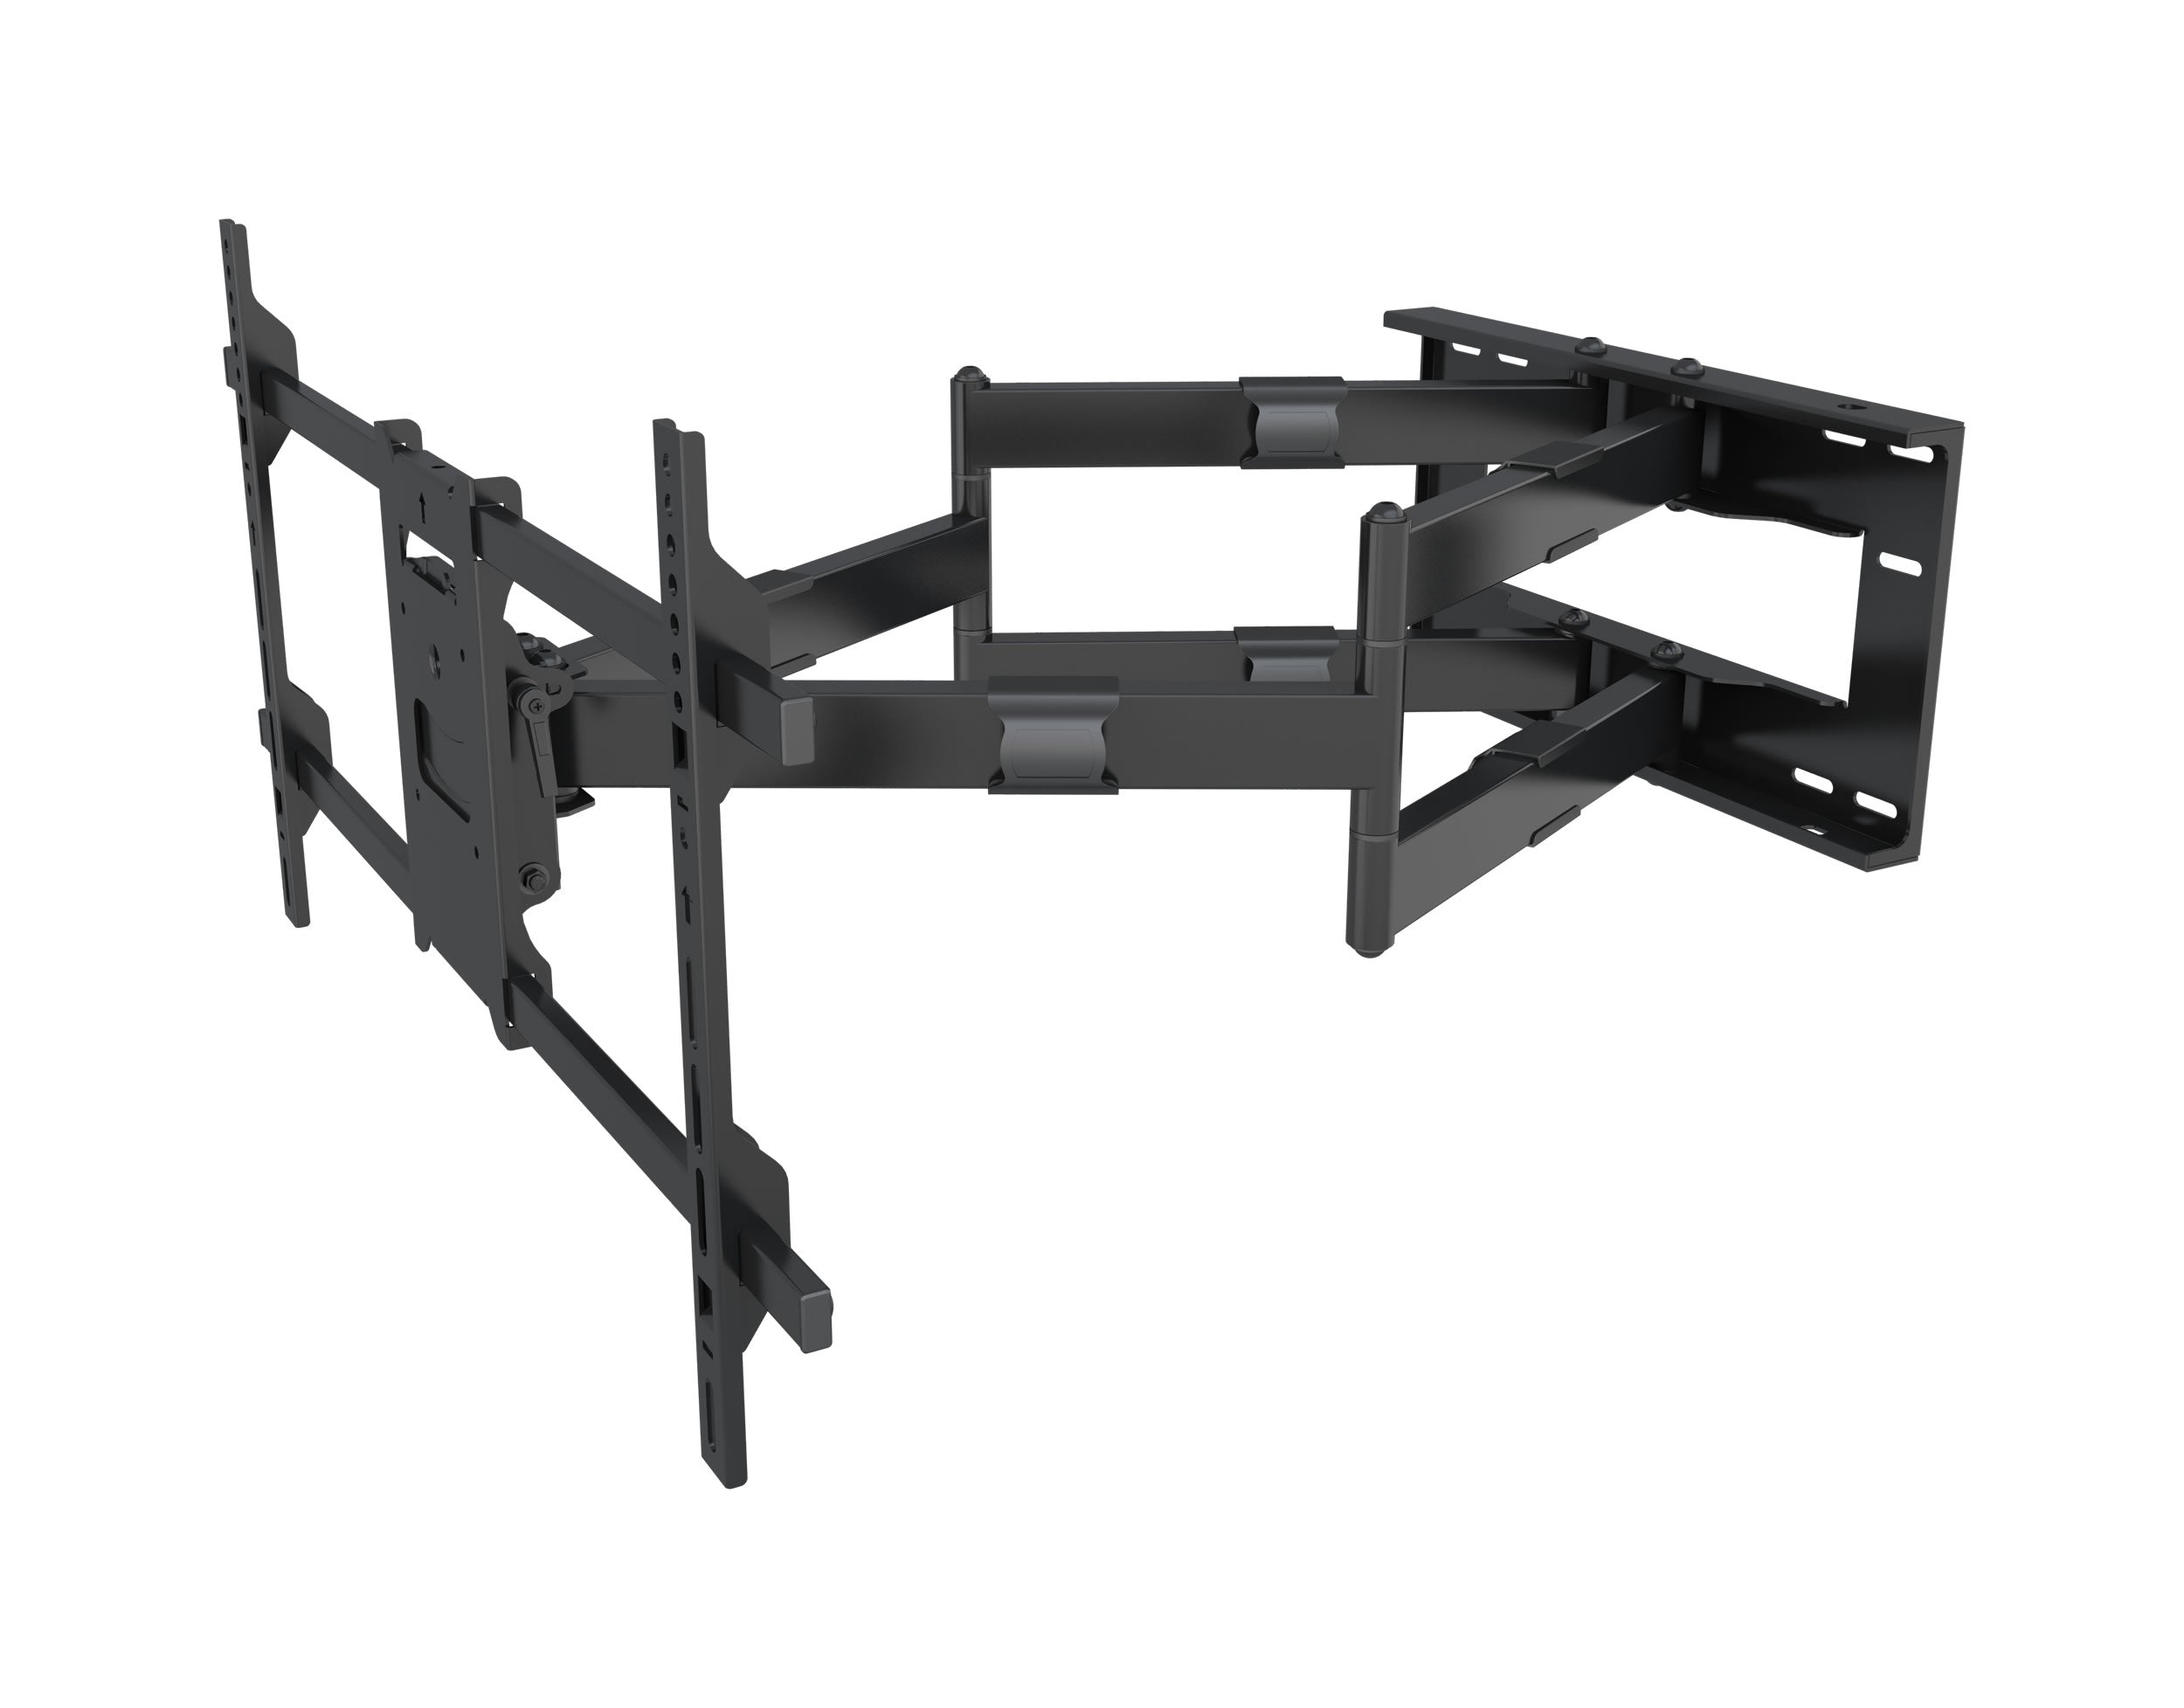 64-1152XL Full motion Flat LCD LED TV / Panels Wall Mount Bracket for 42-90 inches Screens